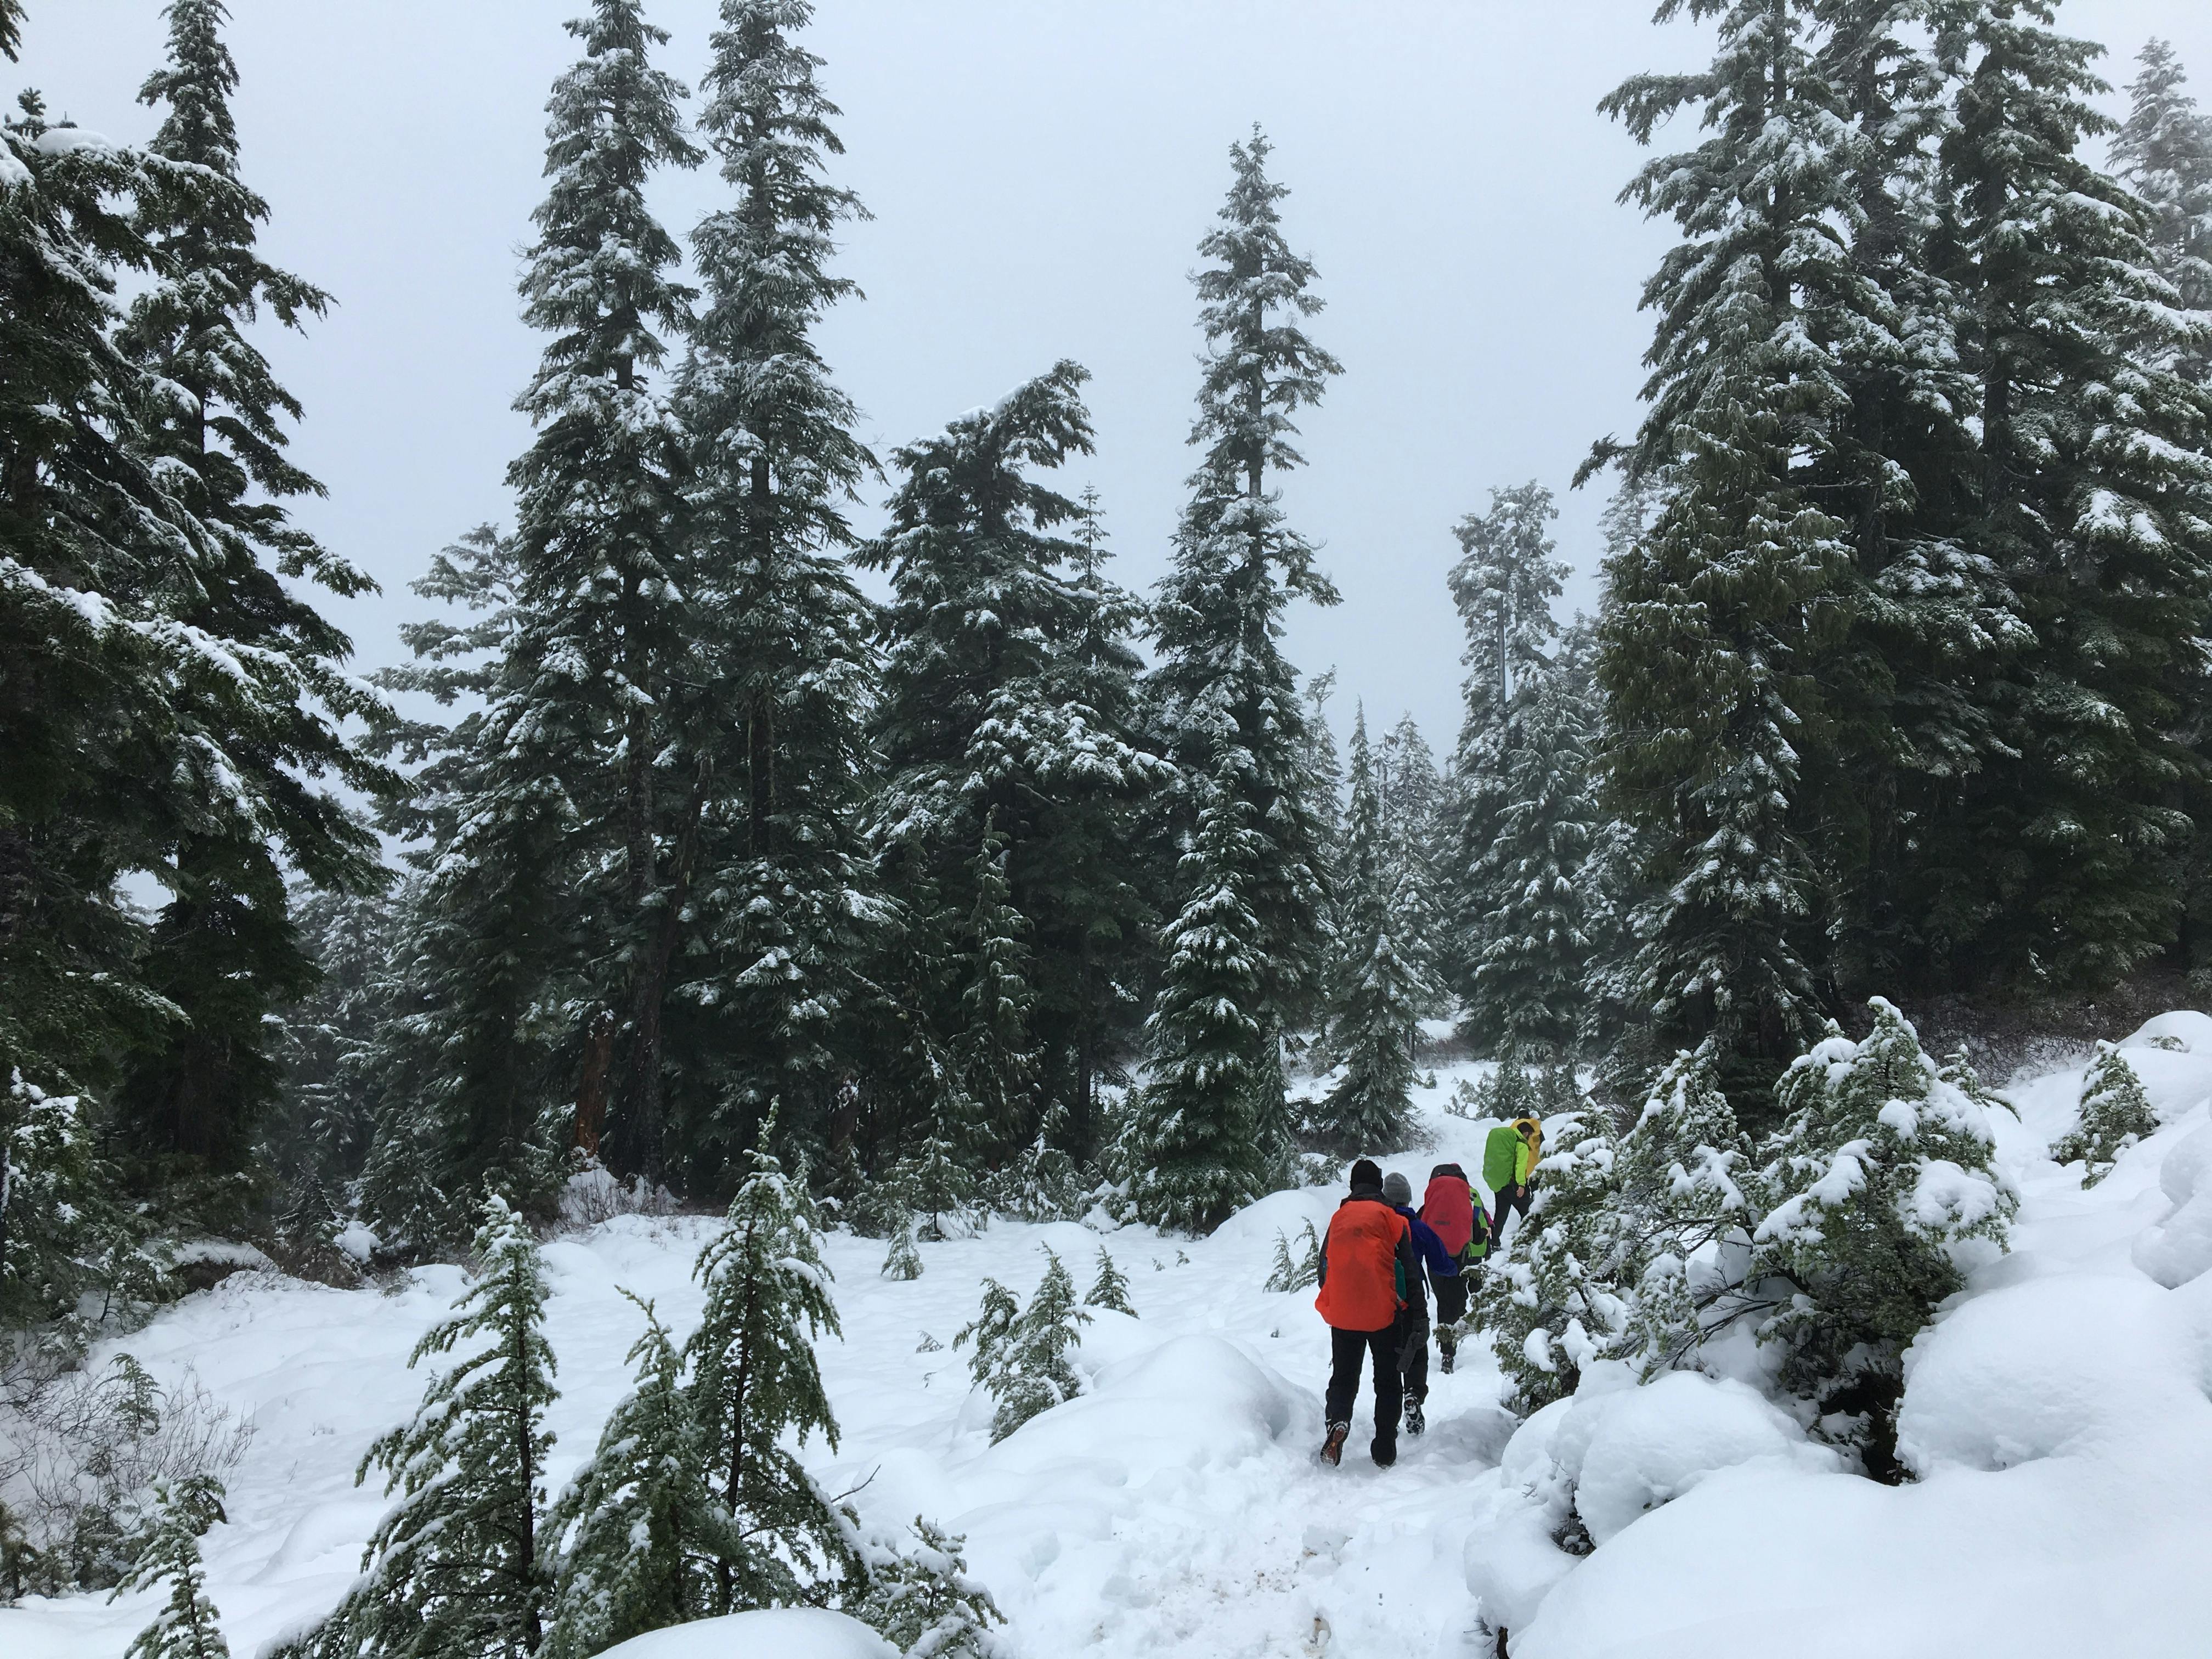 Five hikers walking through a snowy forest